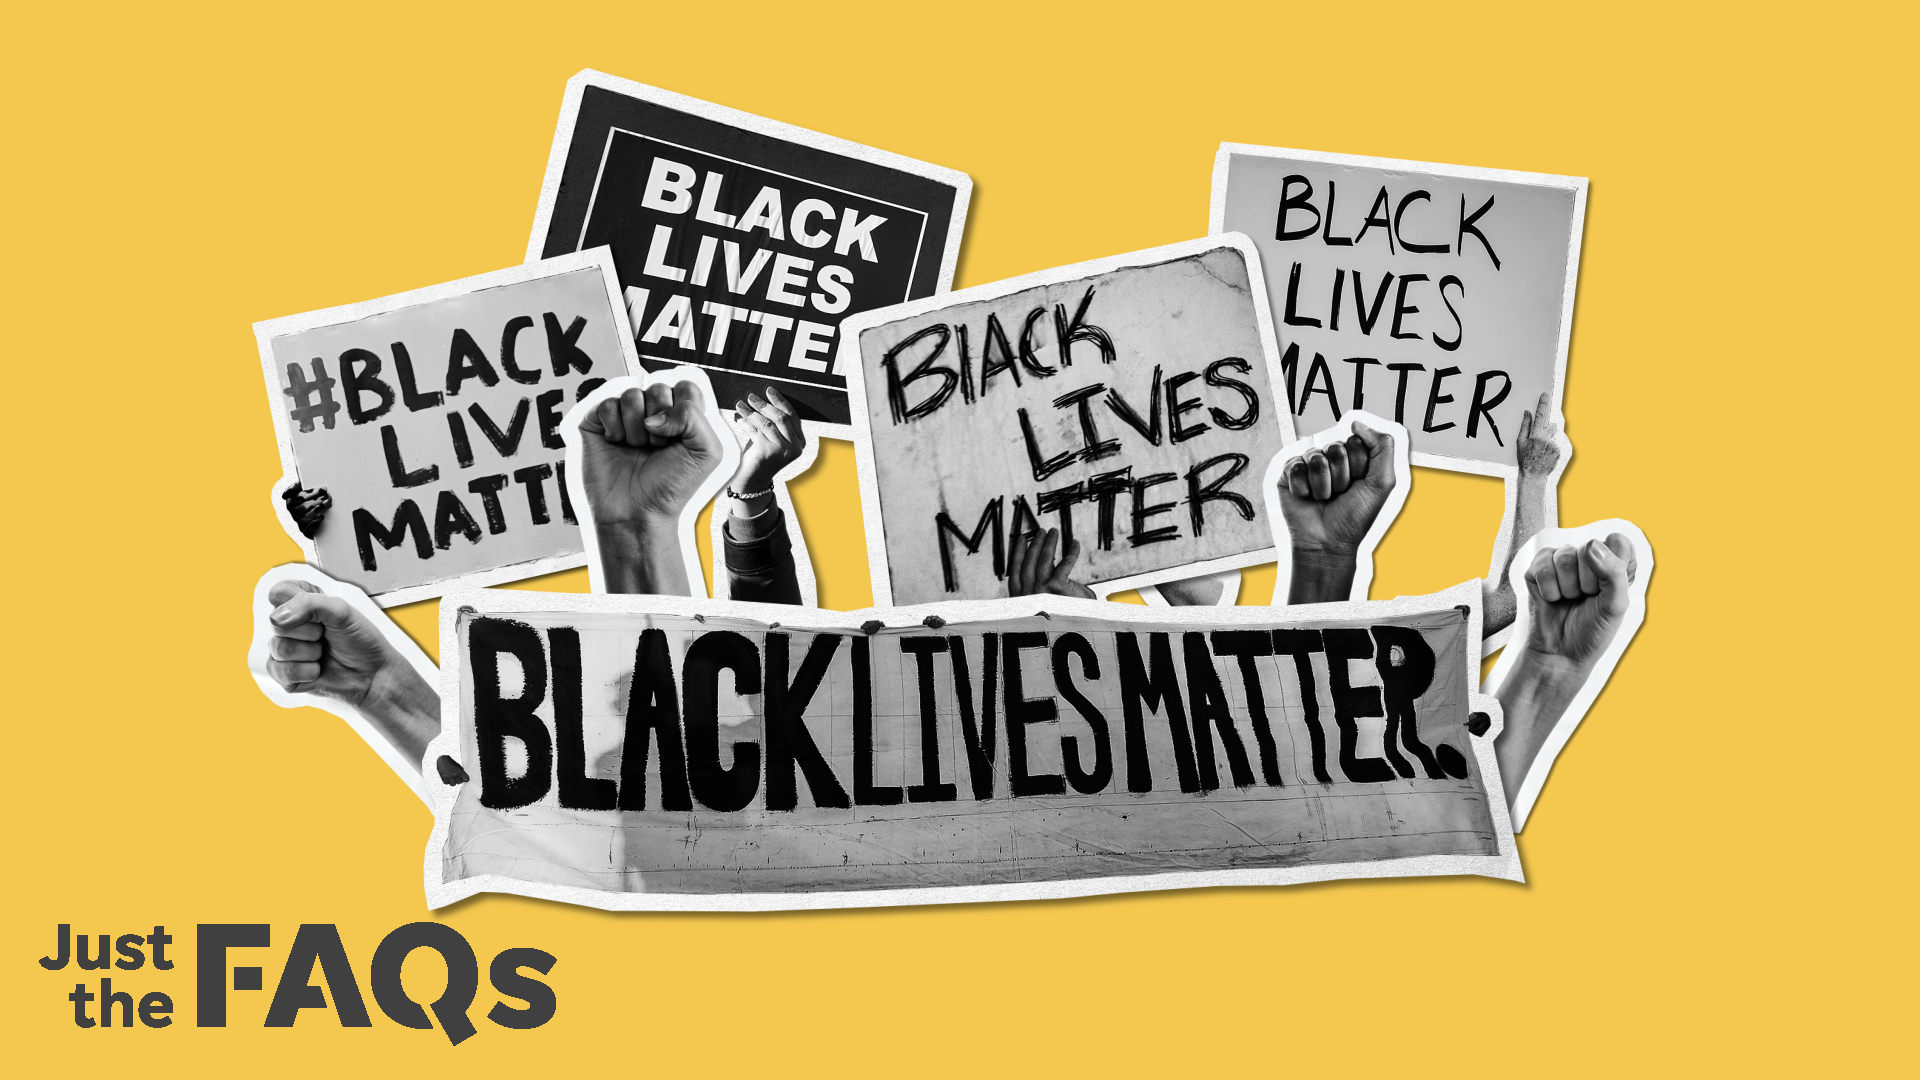 Black Lives Matter's history from Trayvon Martin to George Floyd